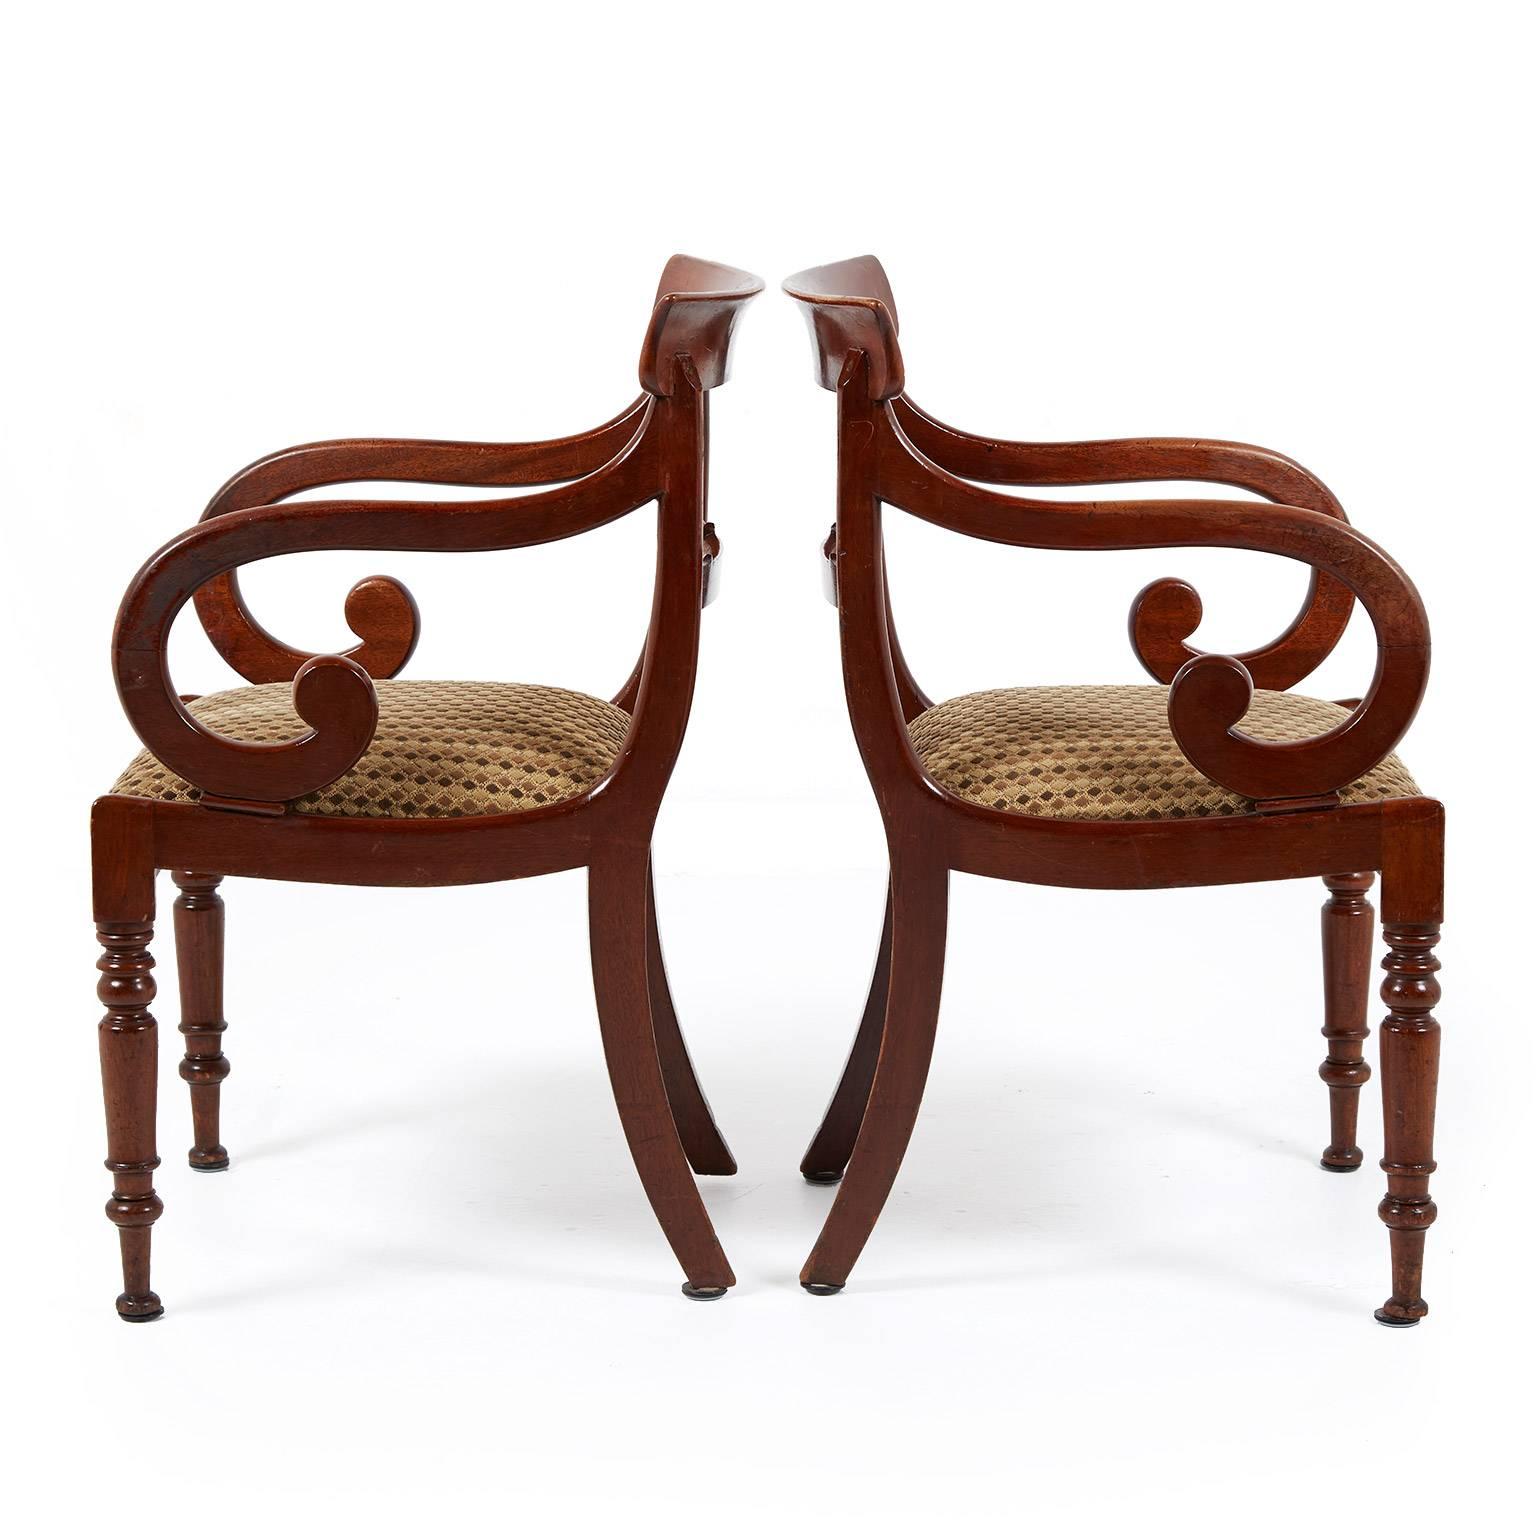 Pair of antique English Regency style mahogany armchairs, circa 1840. Classic lines and solidly constructed ideal for everyday use.



         